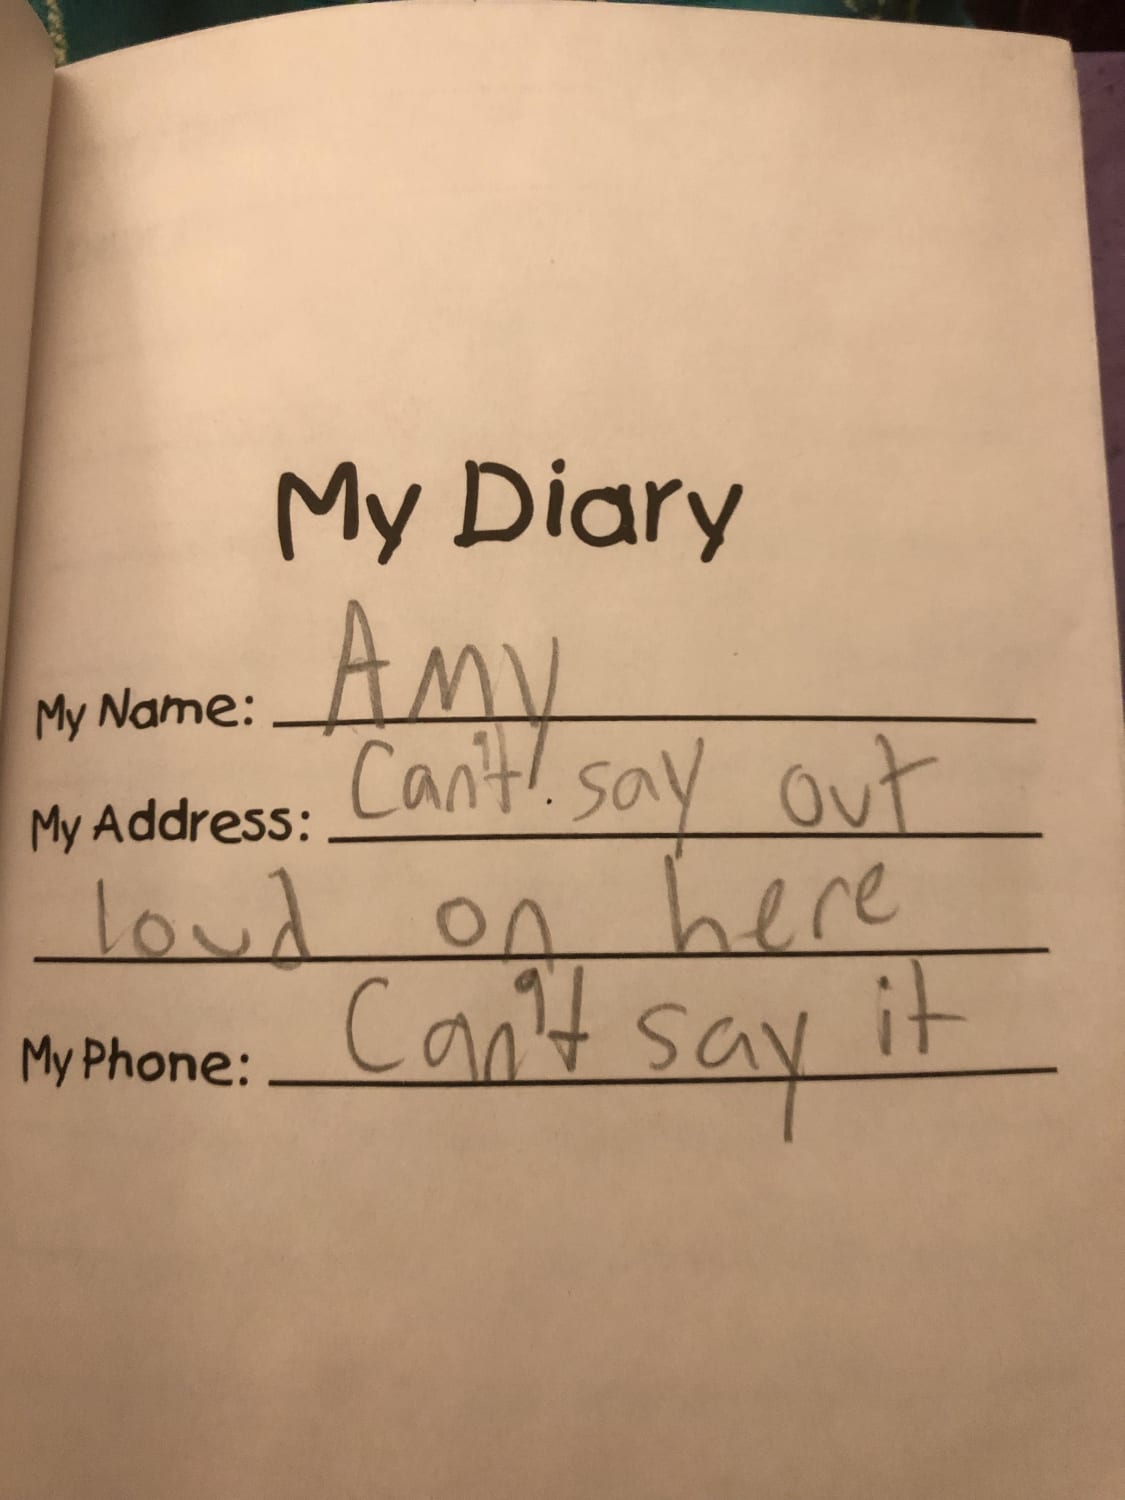 My diary as a little kid, apparently I took stranger danger VERY seriously…